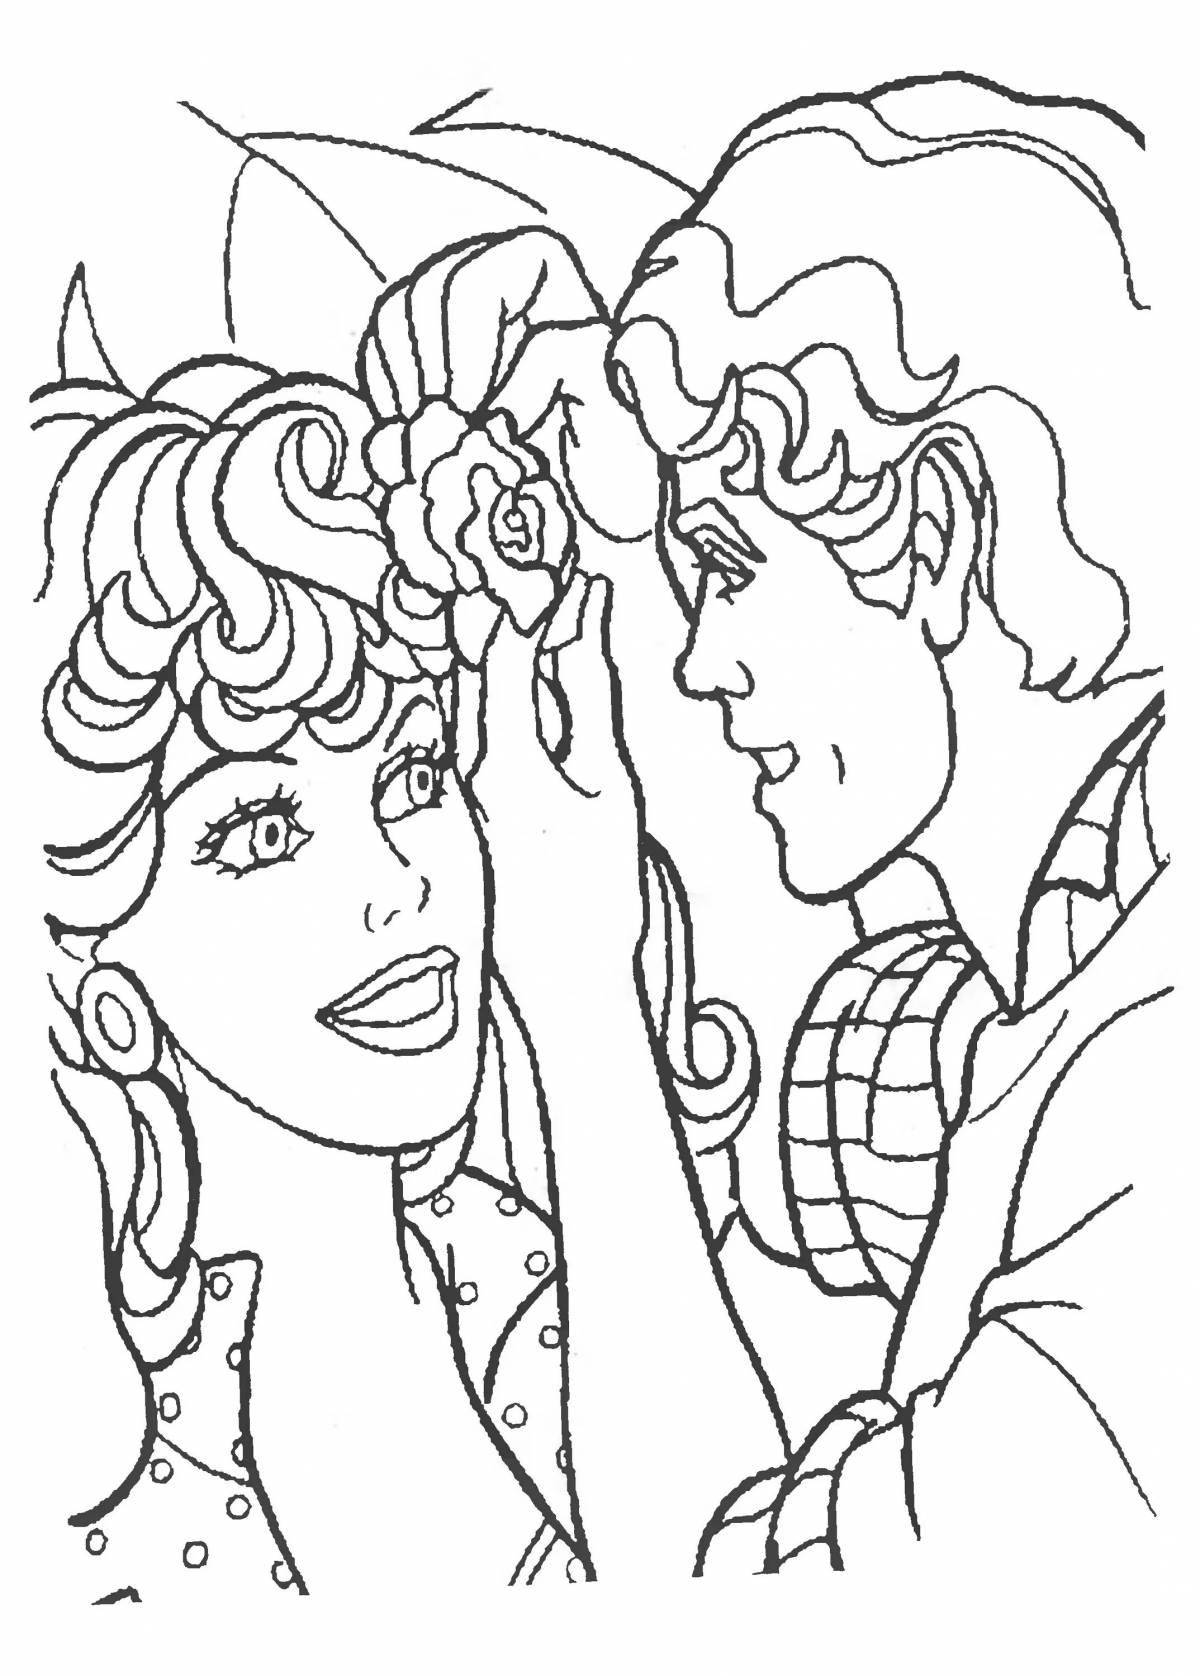 Adorable 90s barbie coloring book